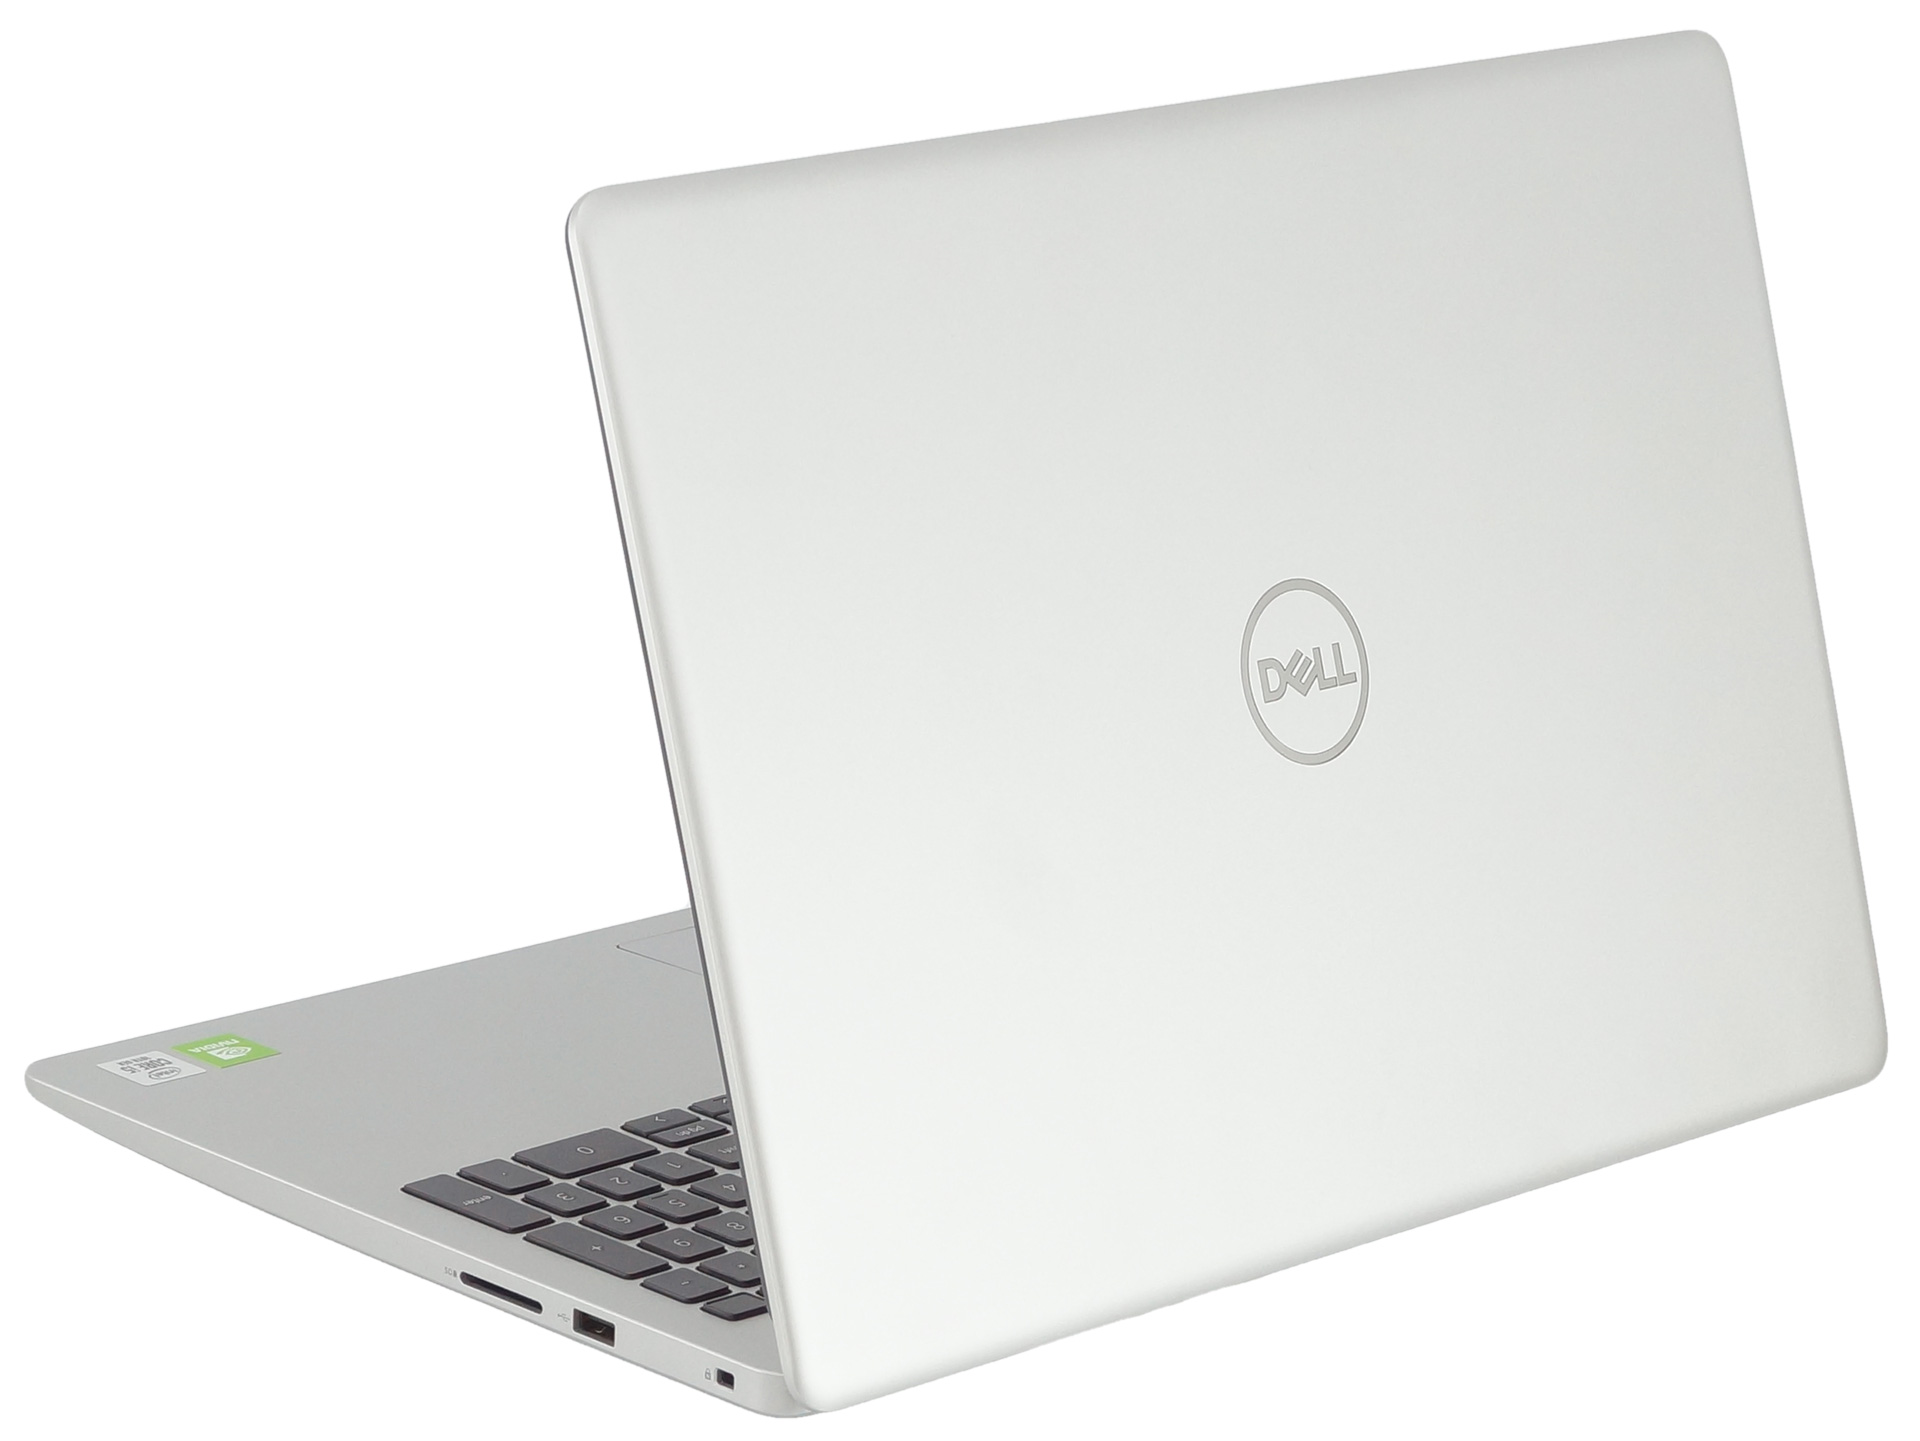 Dell Inspiron 15 5593 laptop review: A win for Intel, but maybe